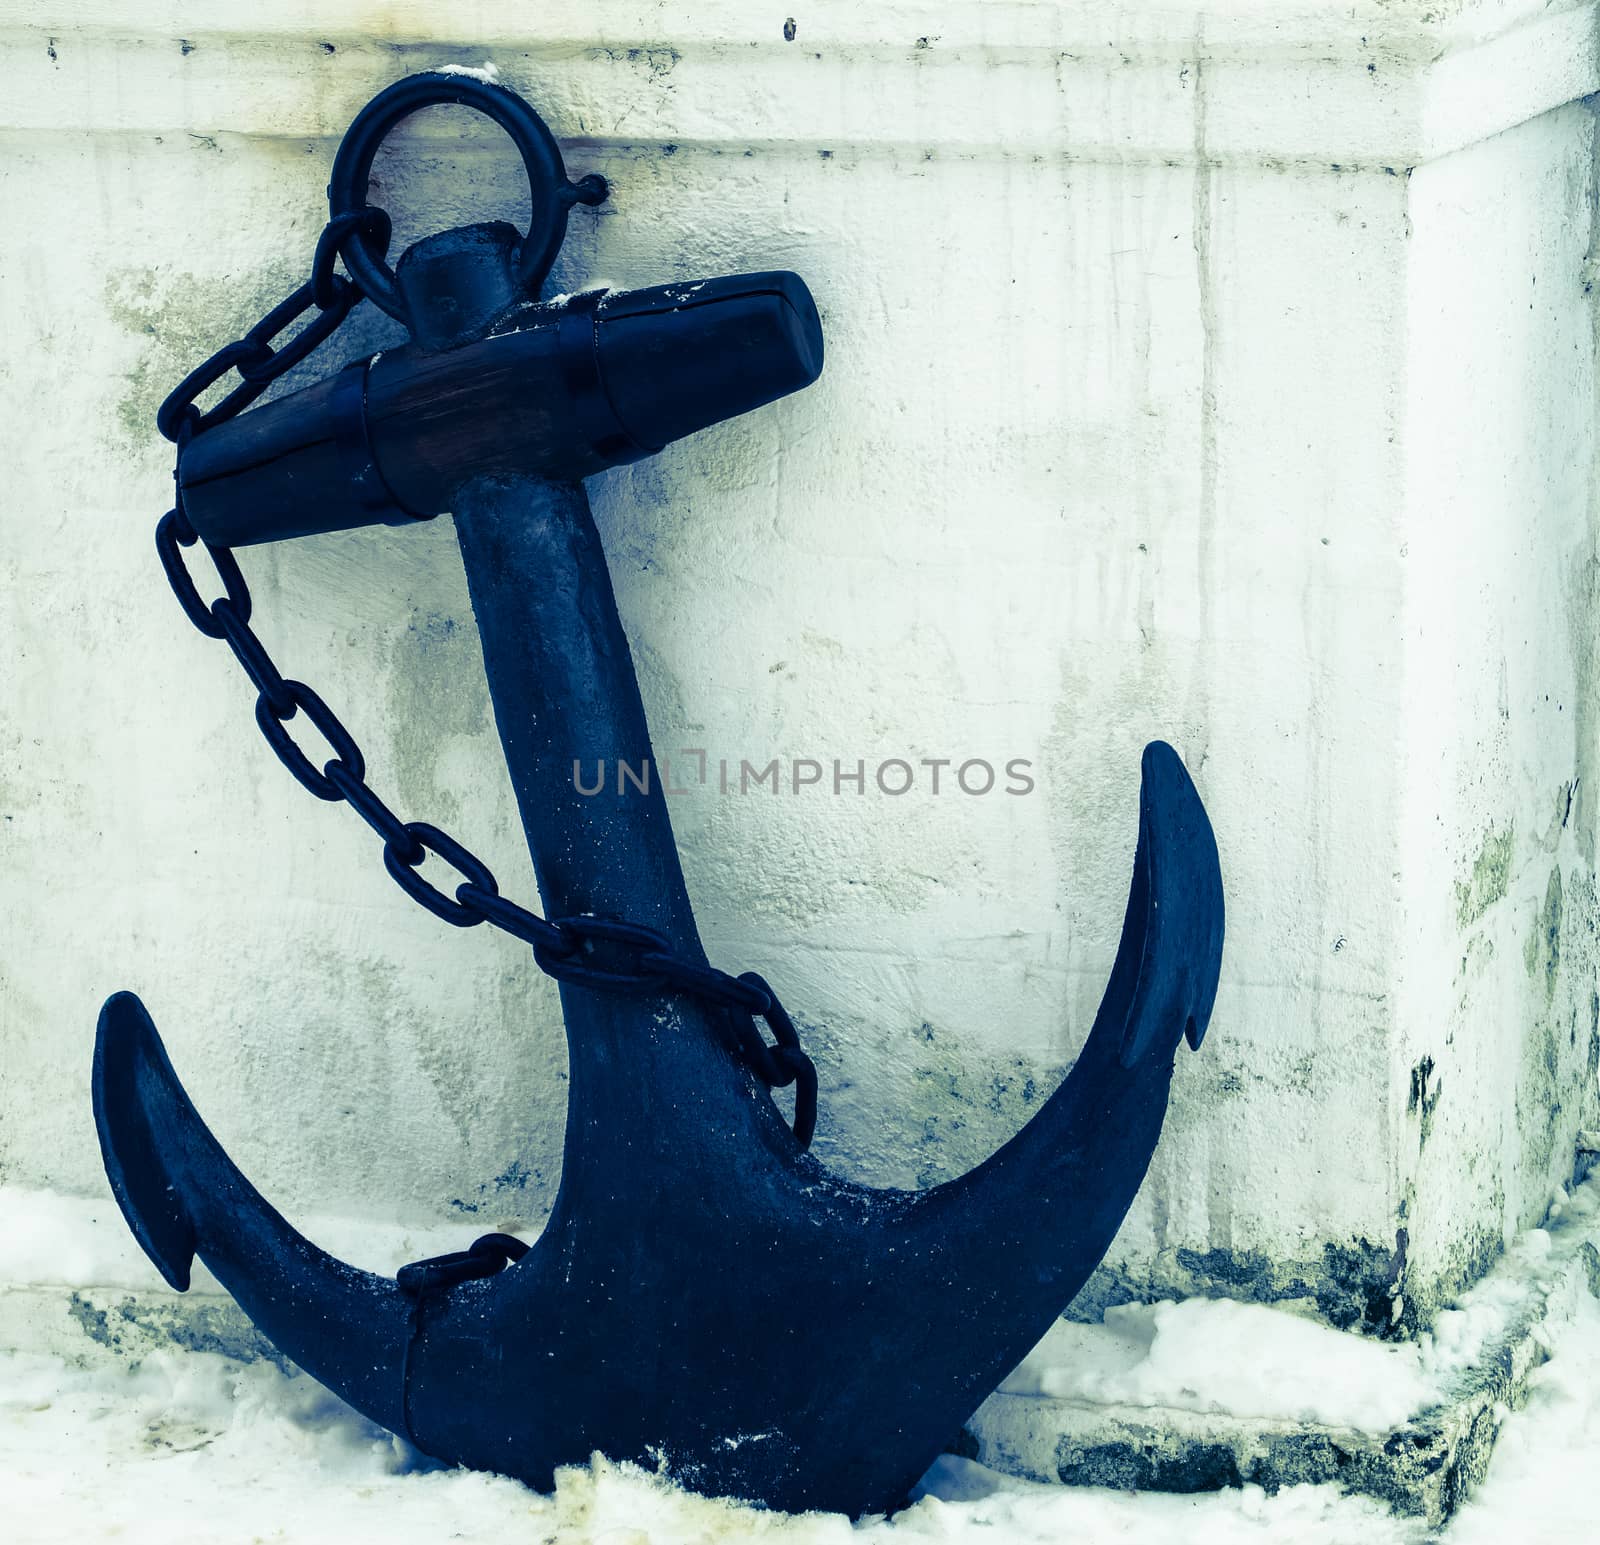 black anchor on a background of white snow